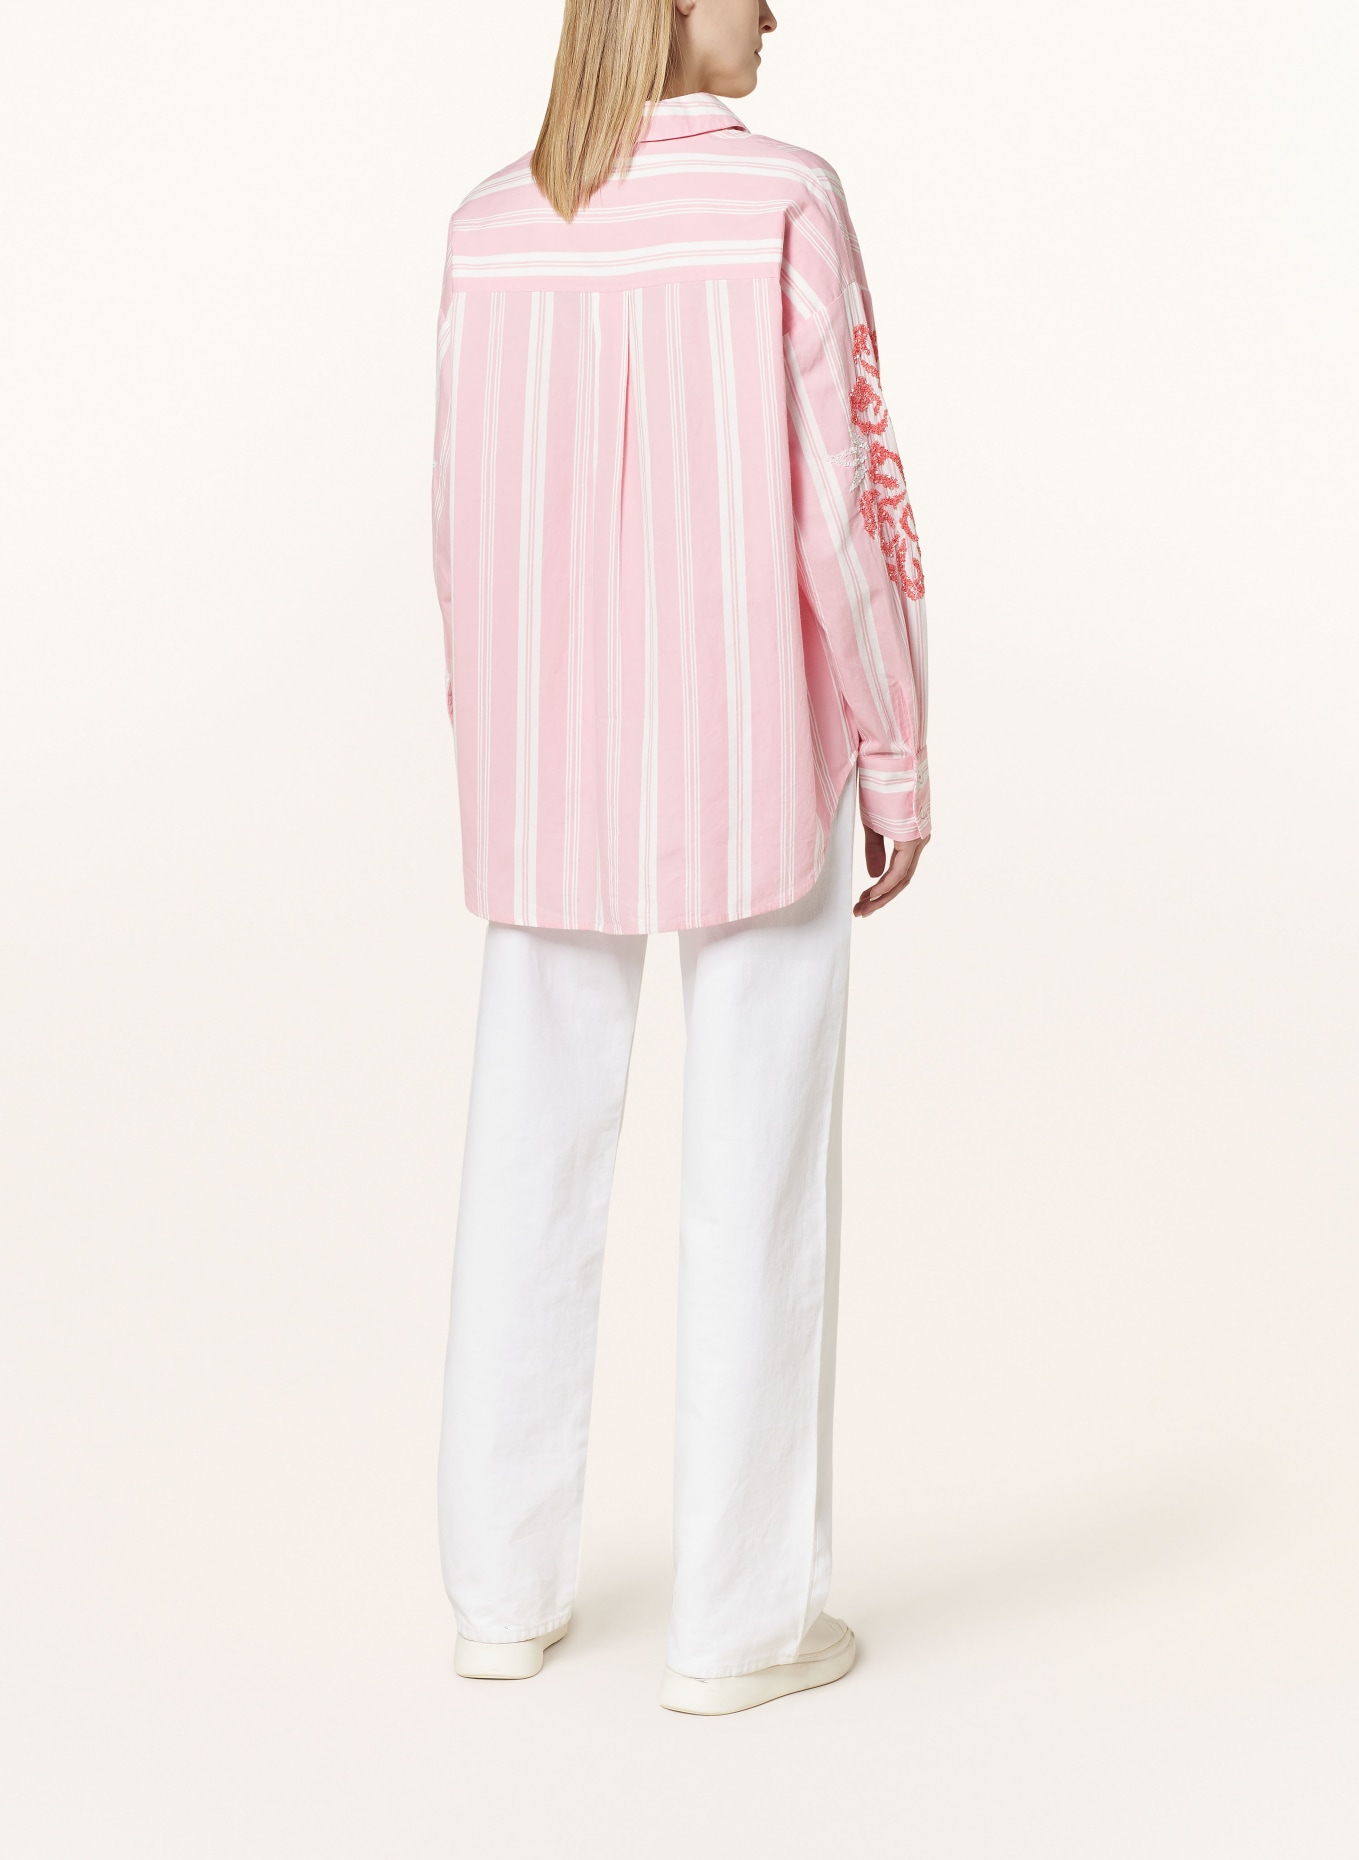 monari Shirt blouse with sequins, Color: PINK/ WHITE (Image 3)